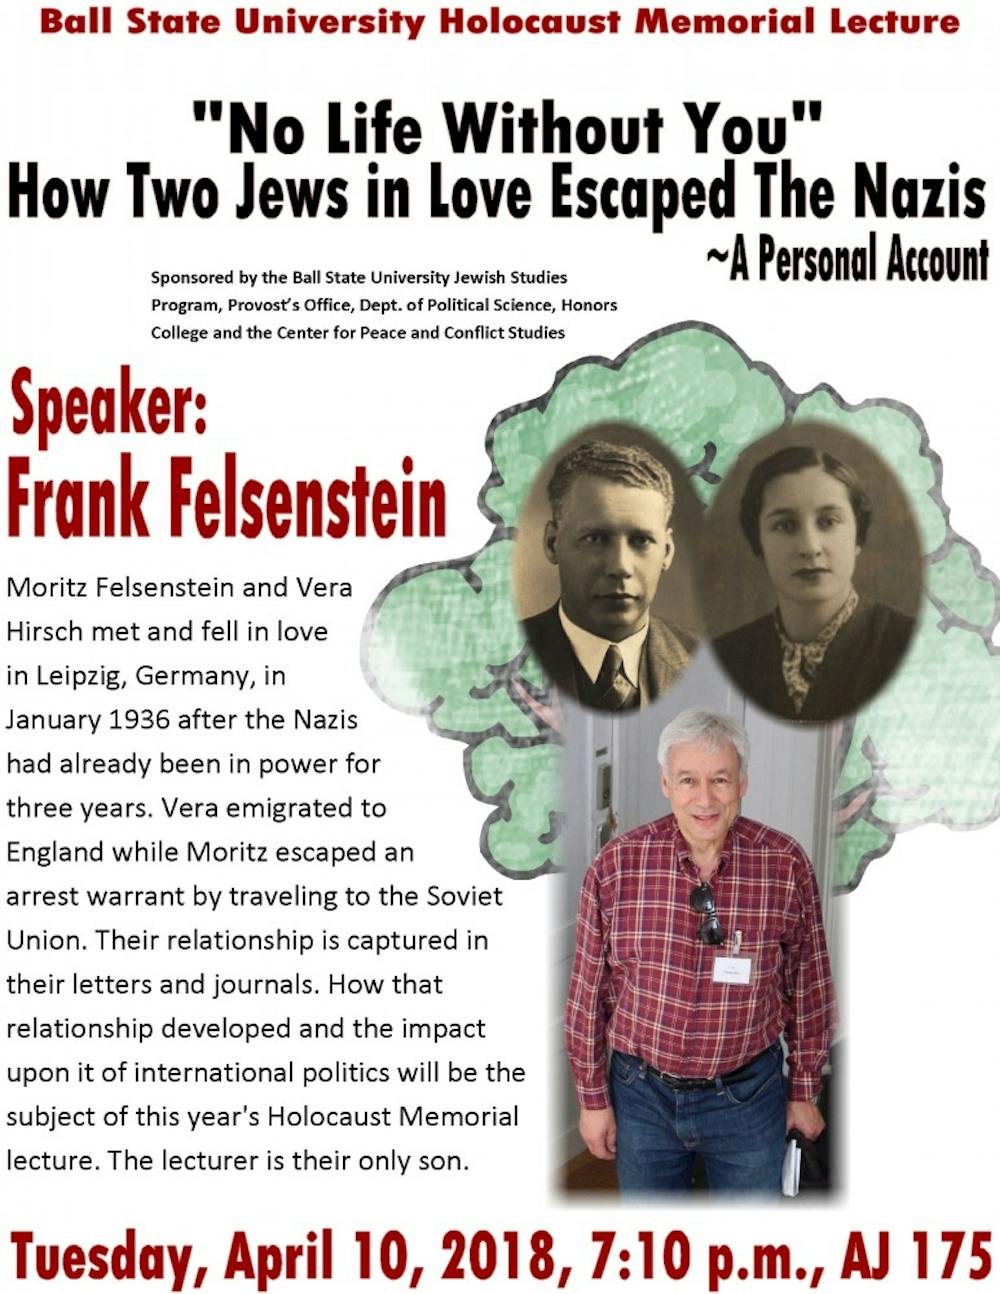 Ball State Holocaust Memorial Lecture rescheduled 